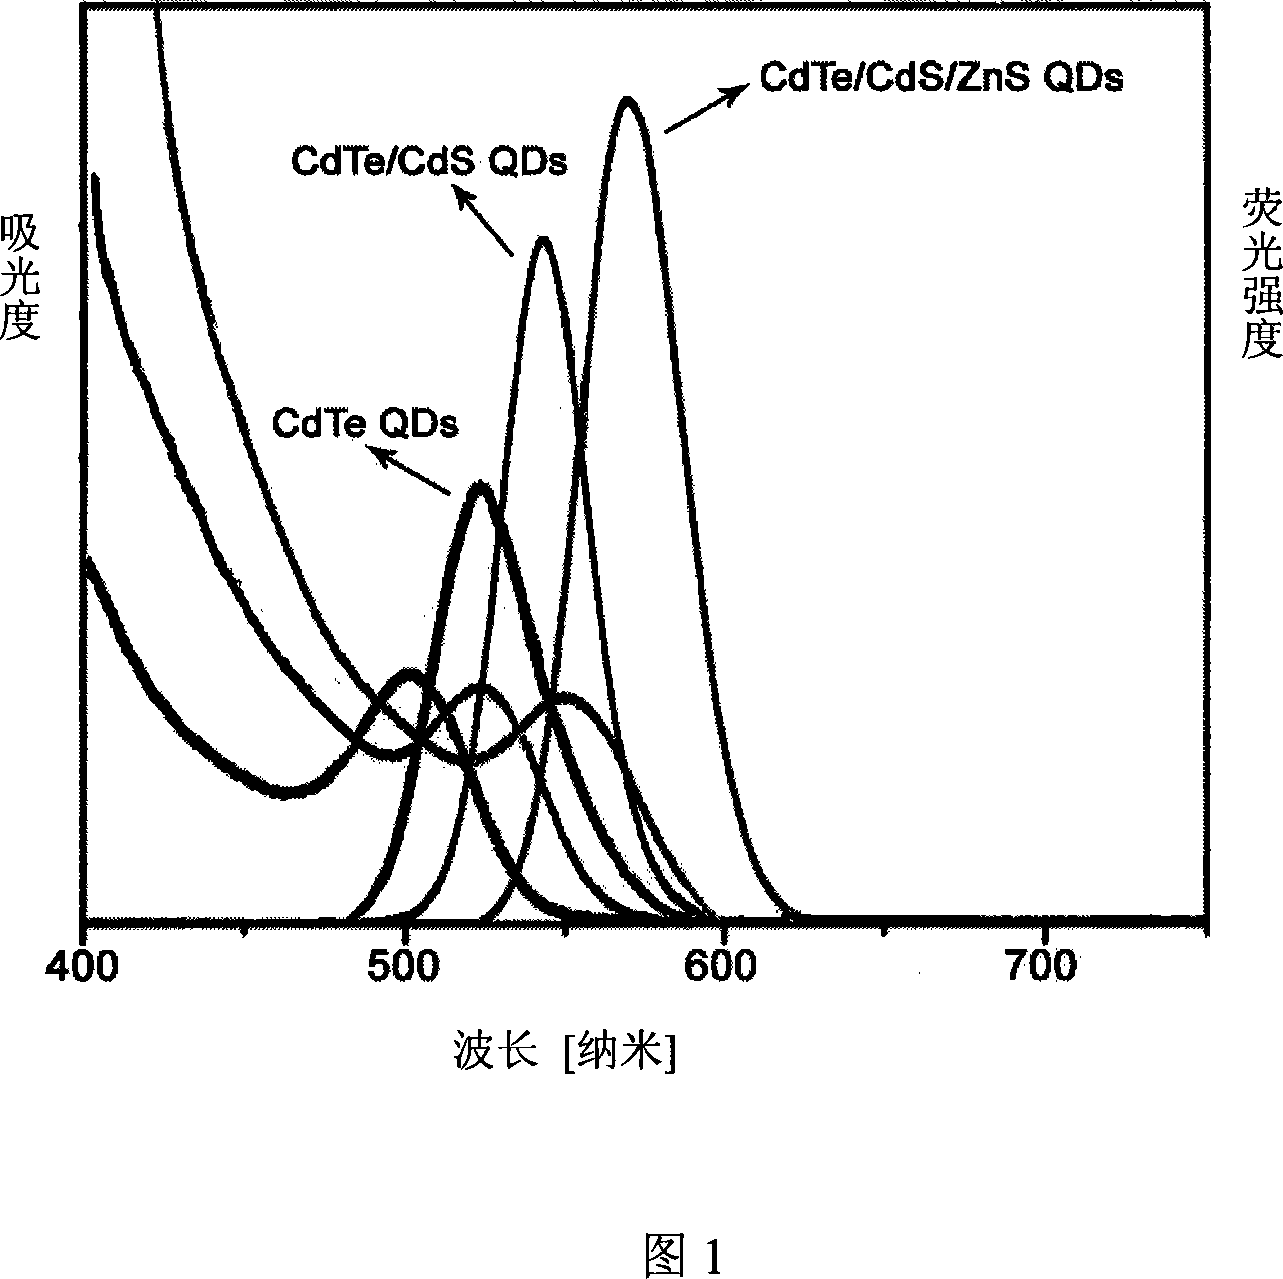 Method of preparing CdTe/CdS/ZnS core-shell-core structure quantum points